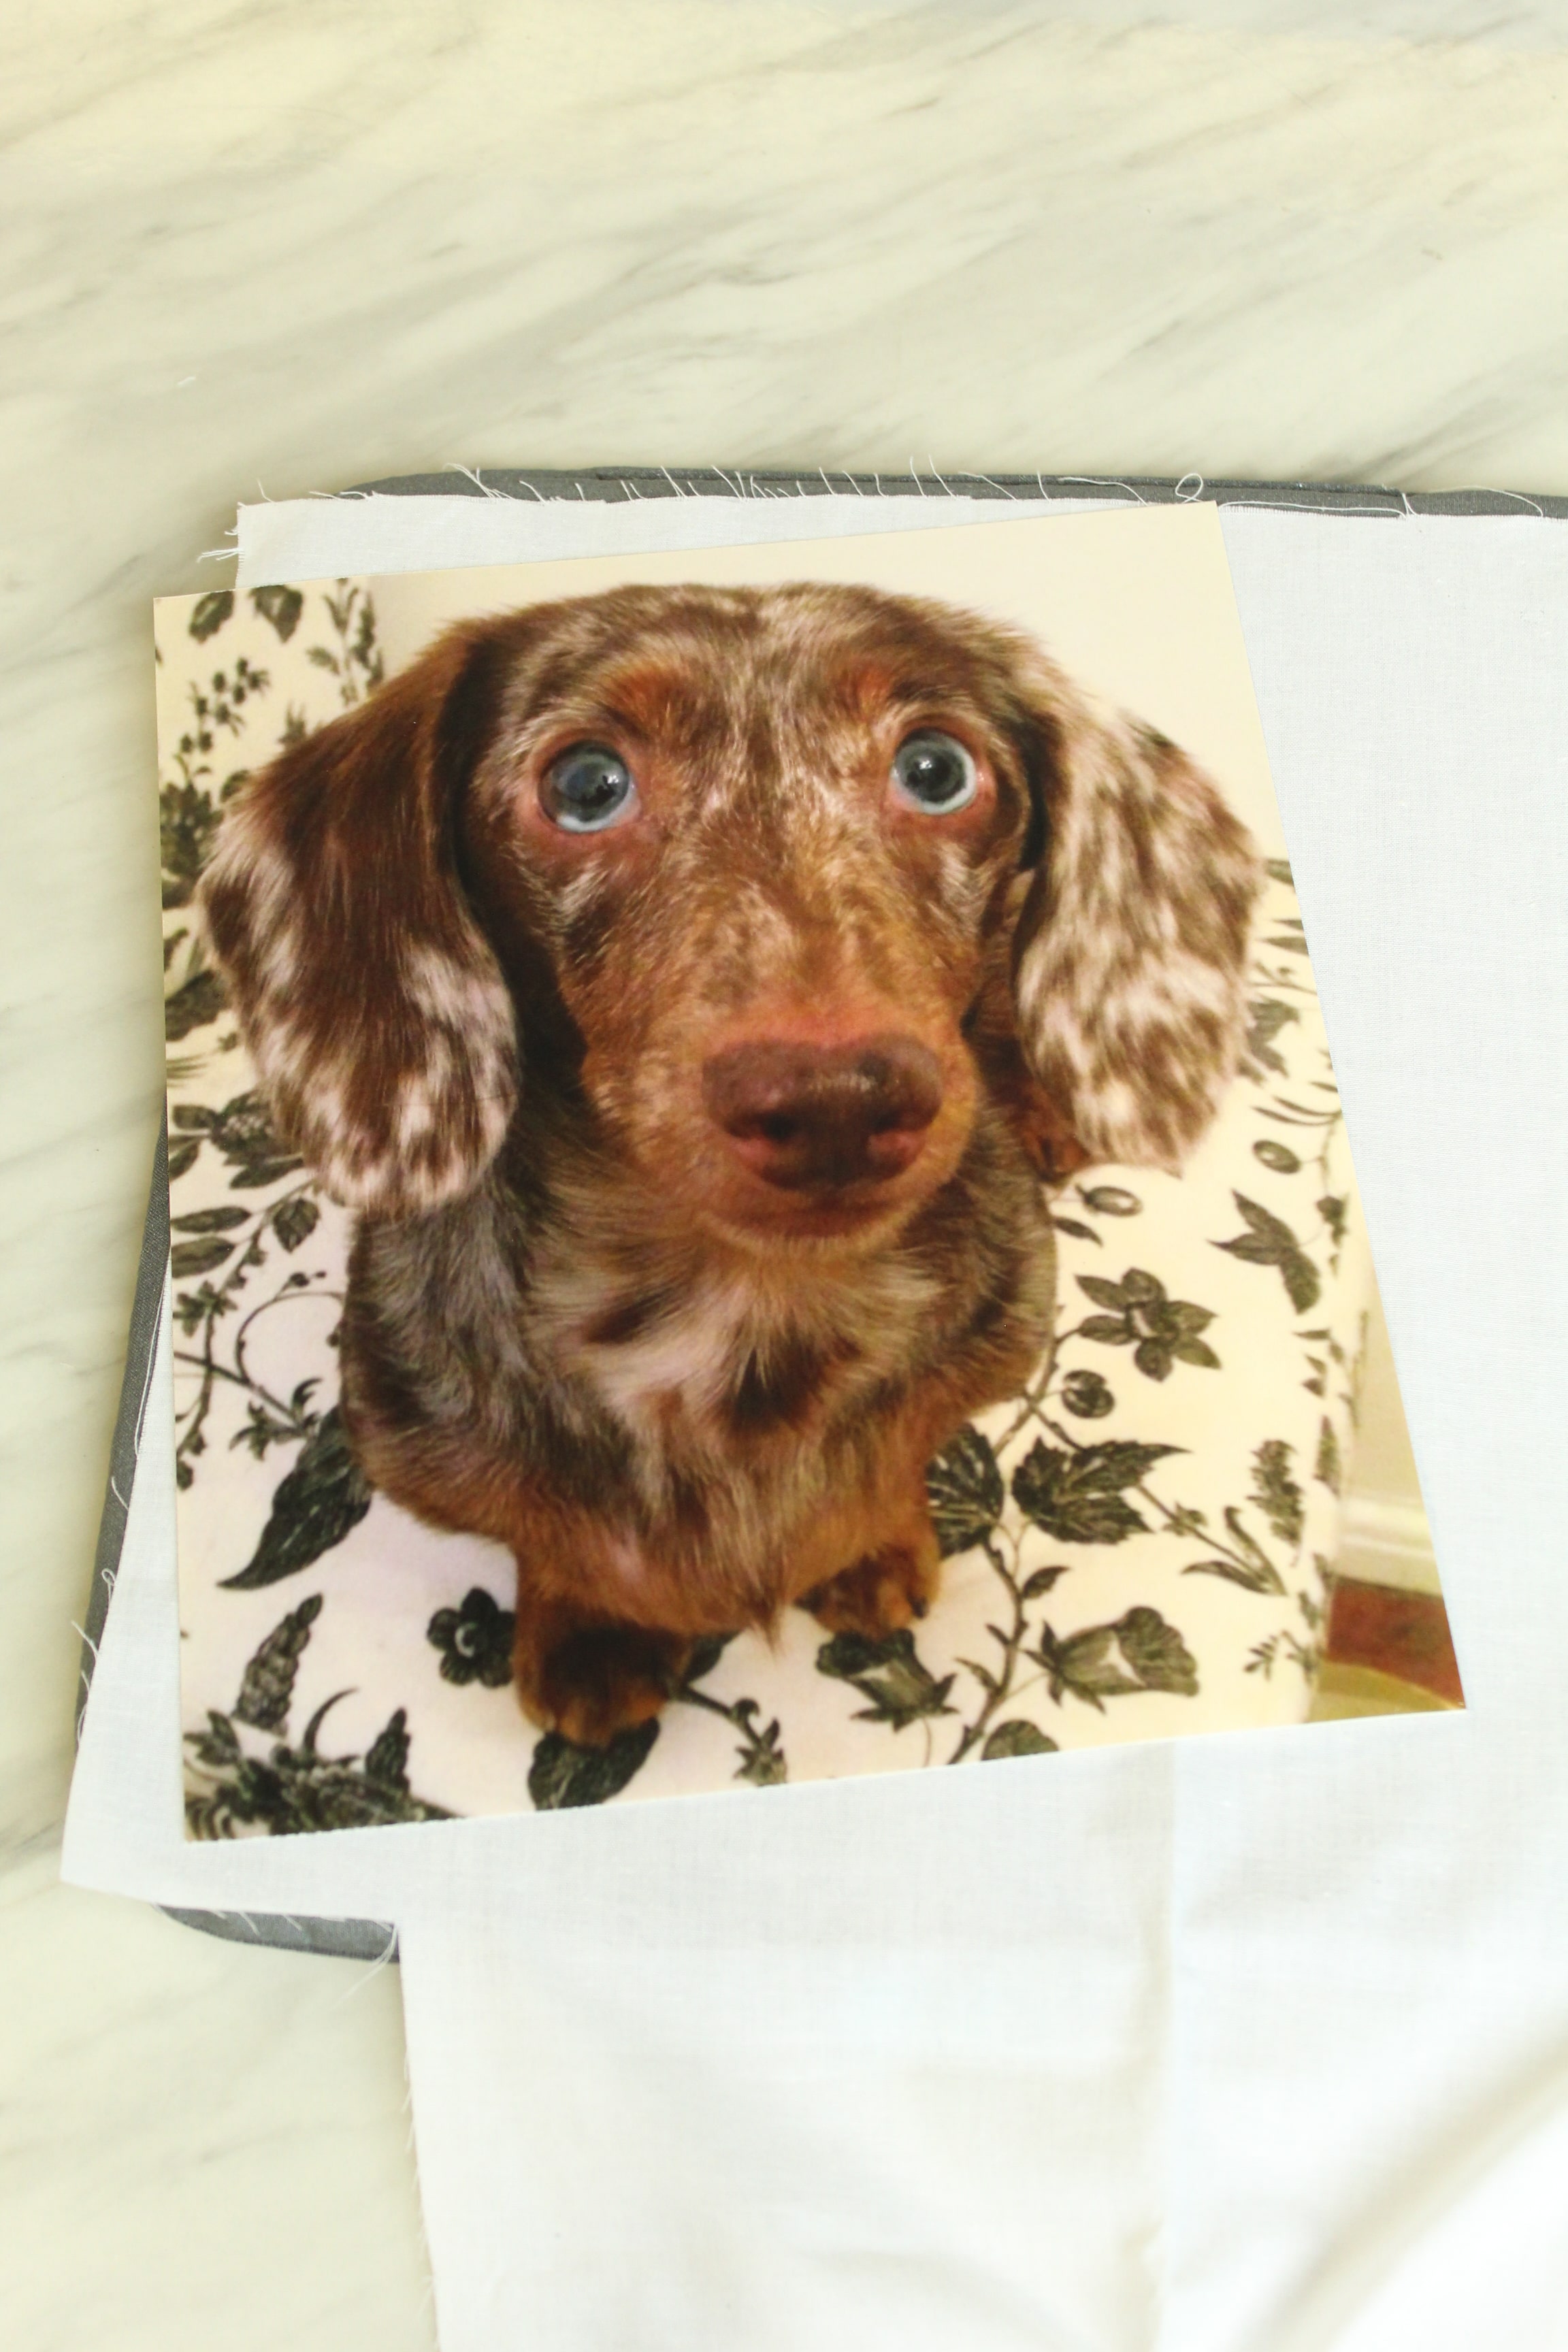 Attention Pet Lovers: You don't want to miss this adorable DIY Pet Portrait Pillow!